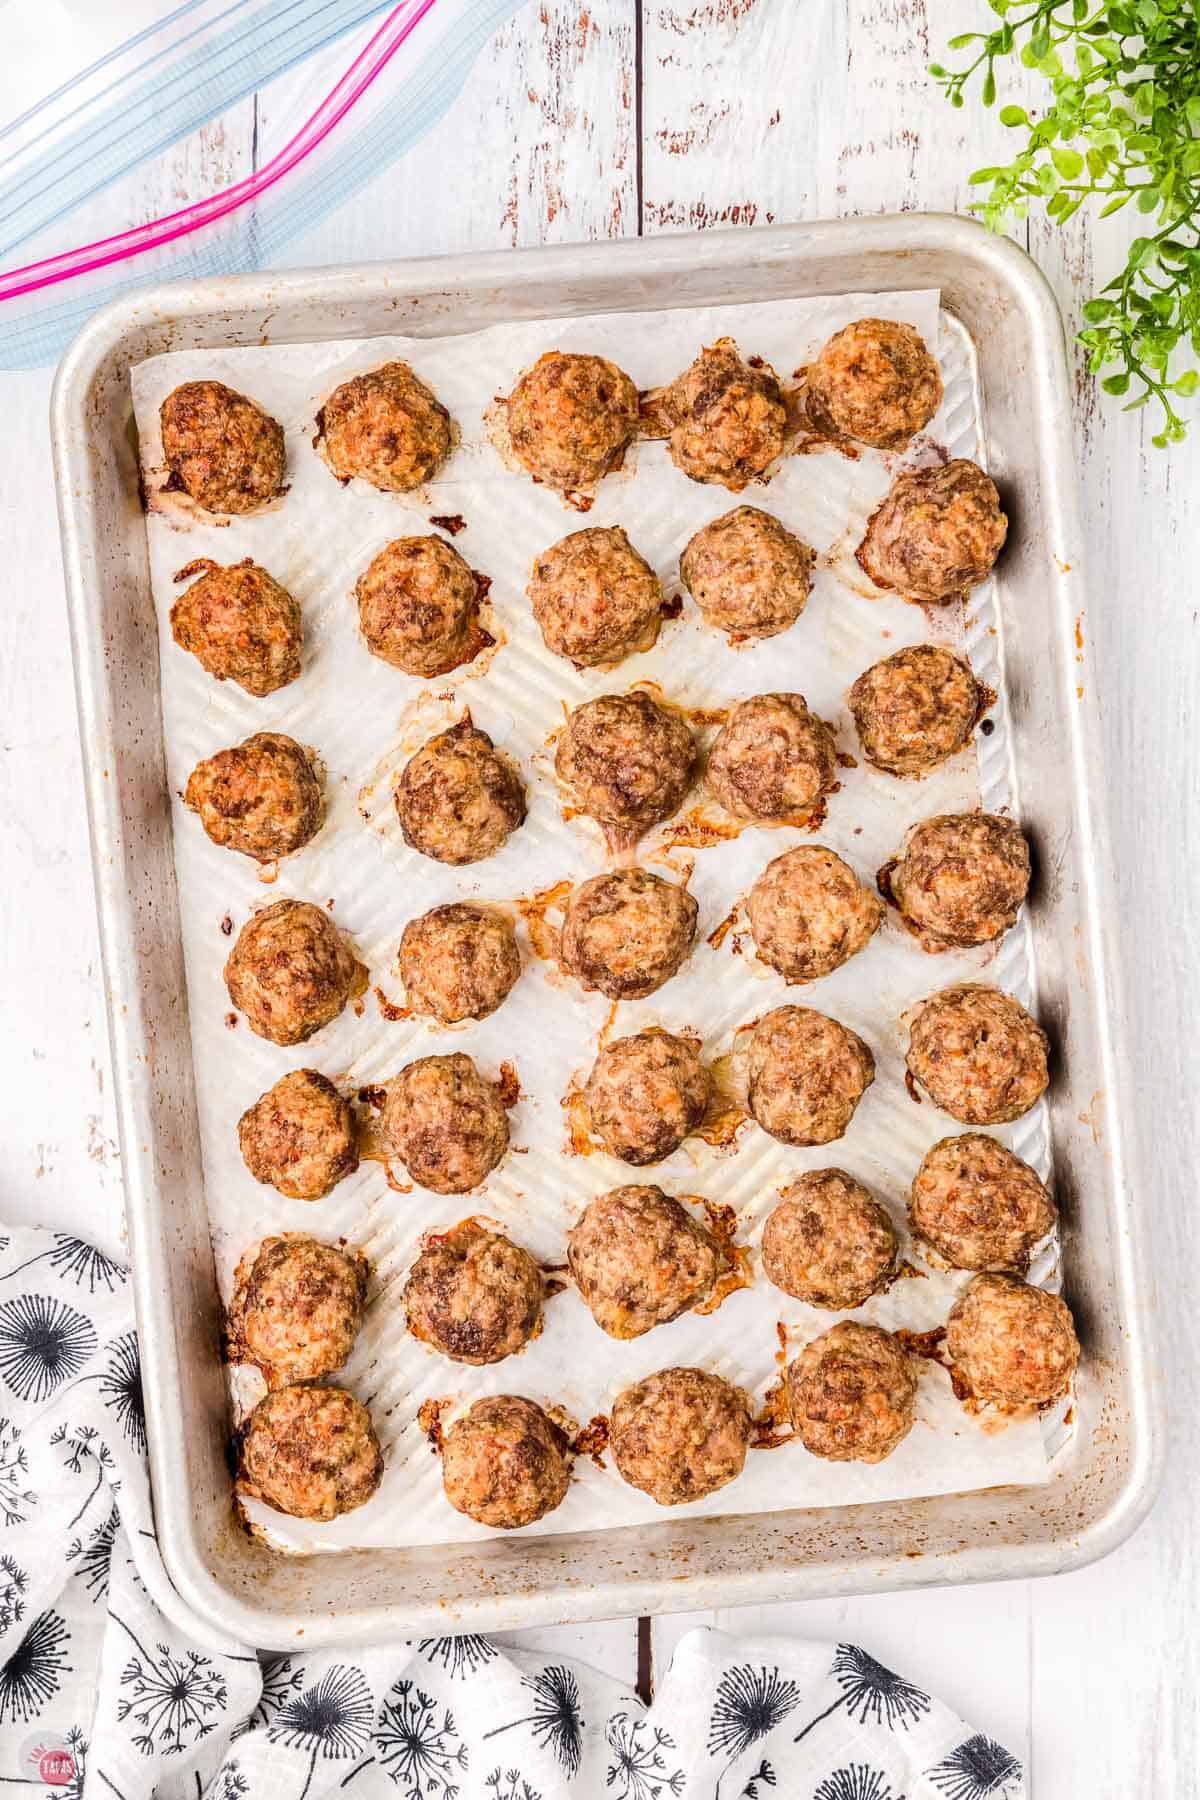 leftover meatballs are best stored in the freezer